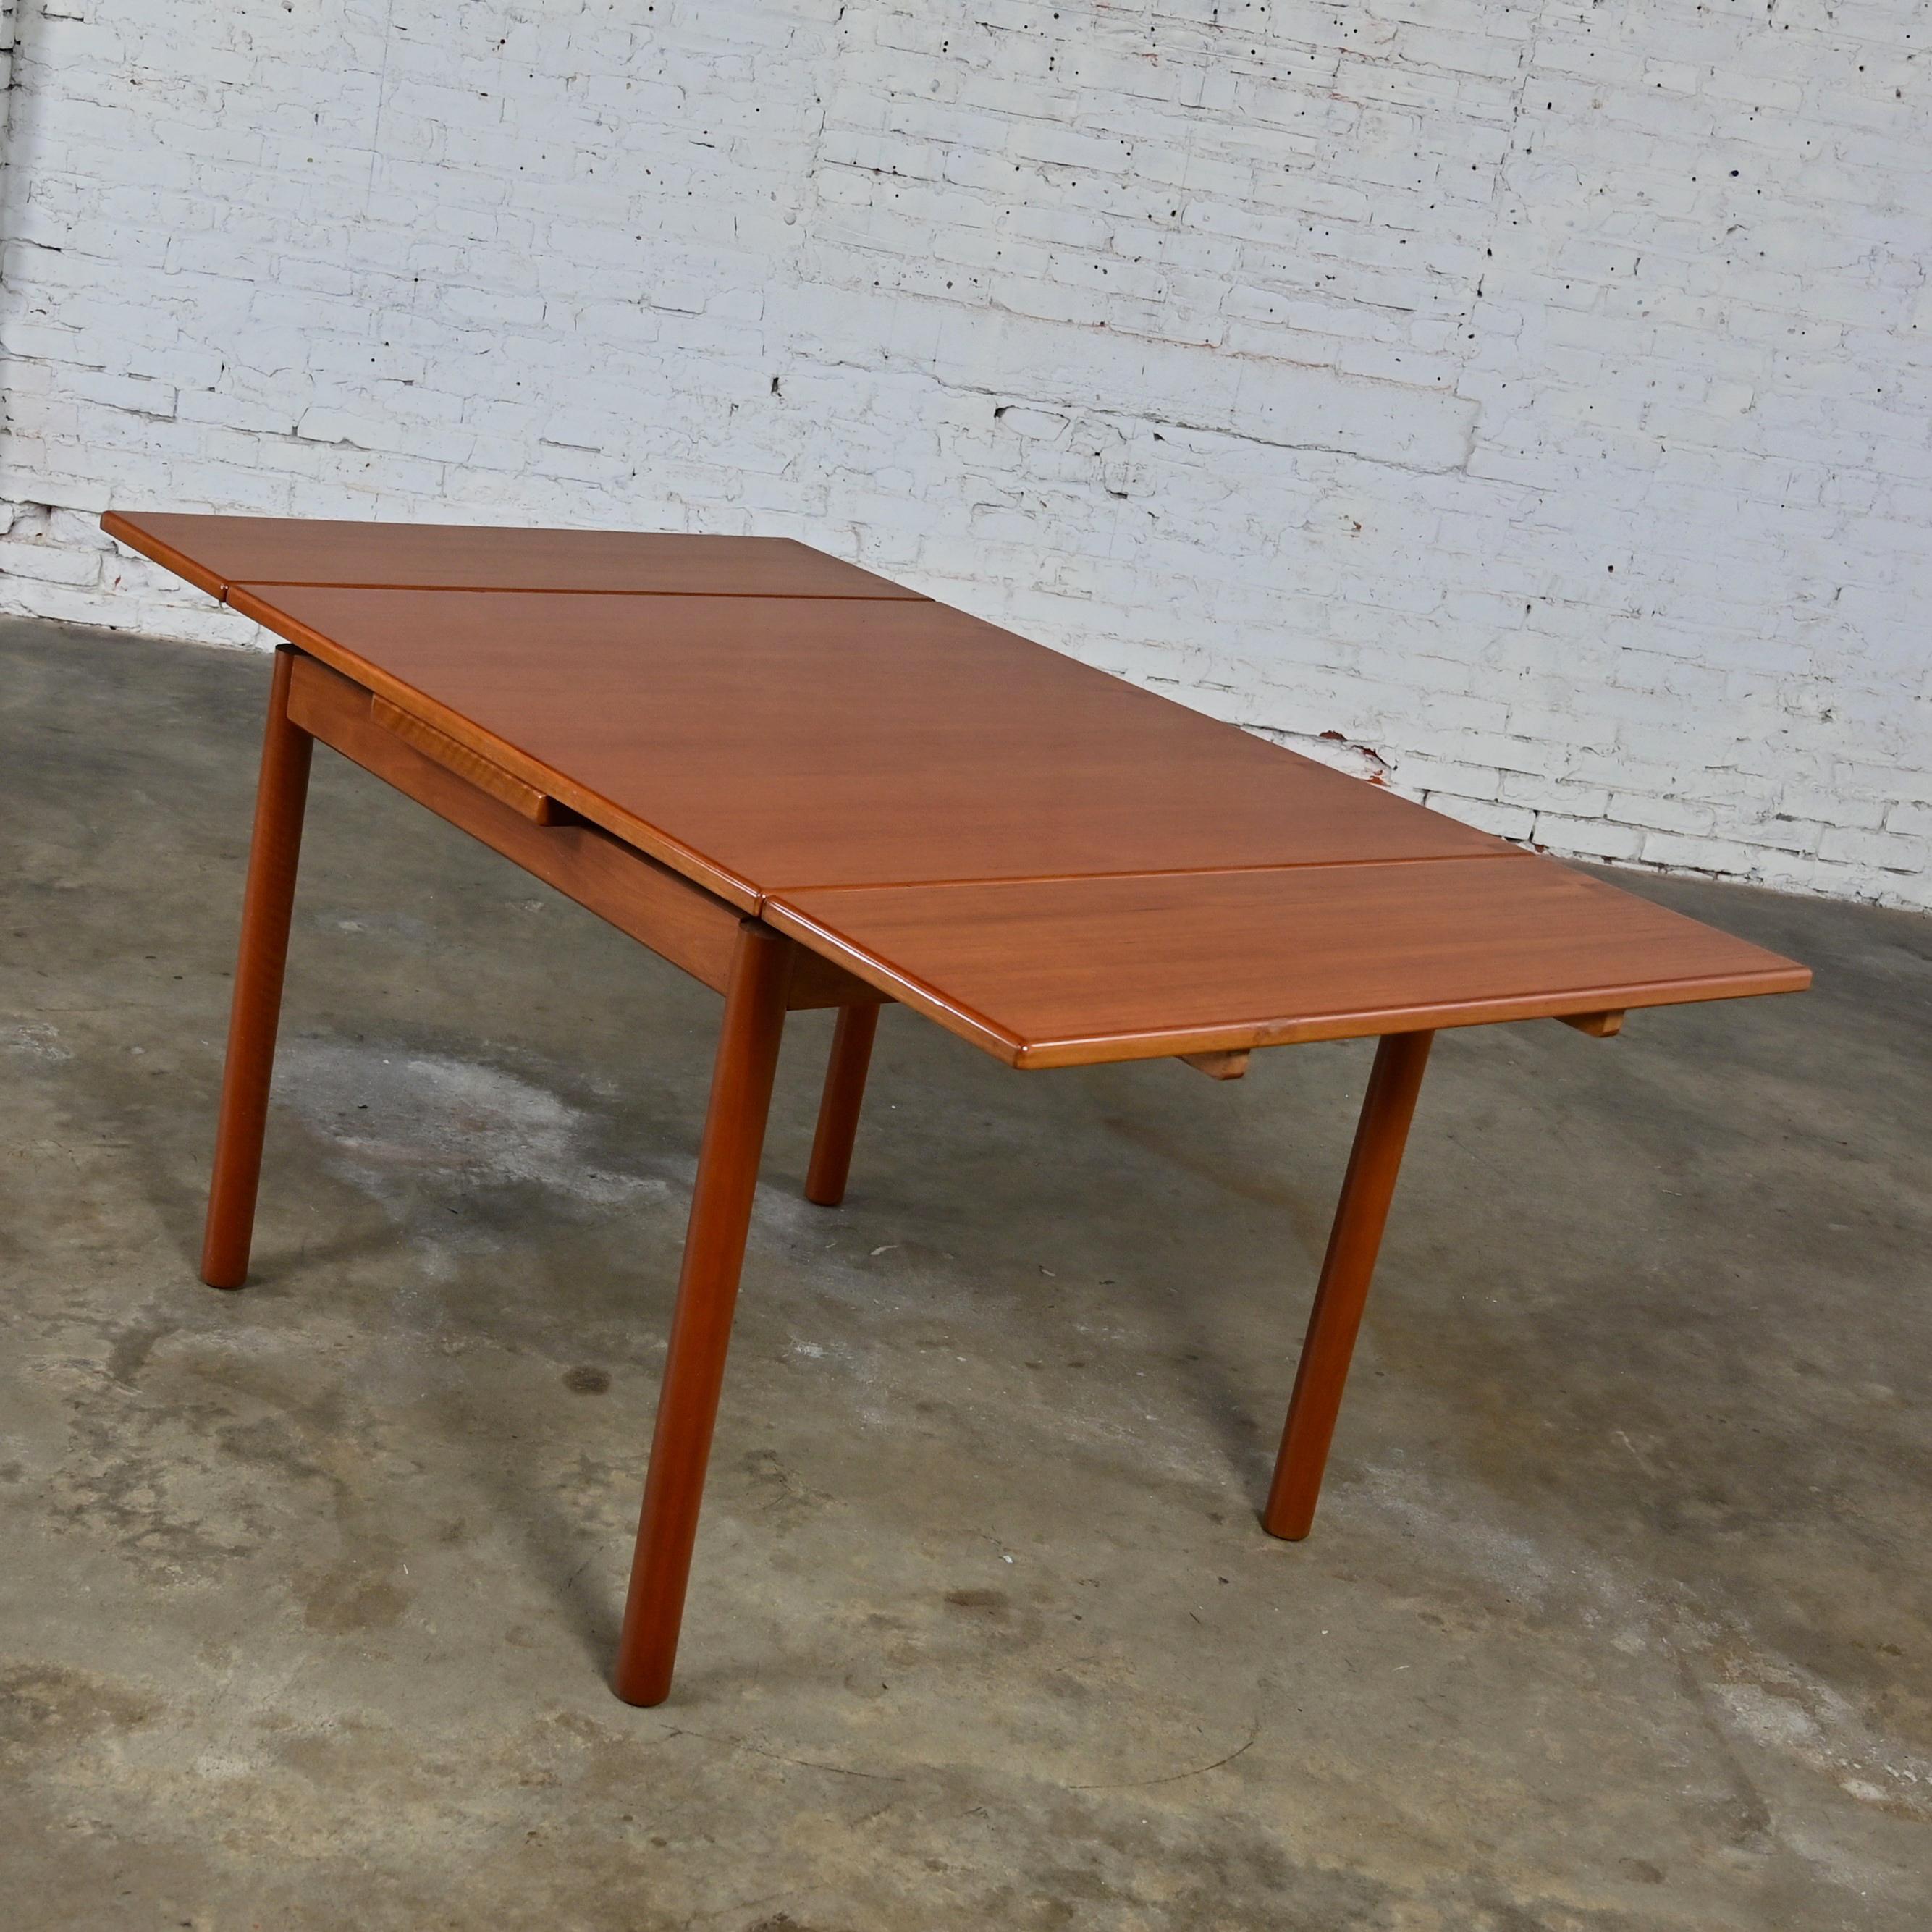 Scandinavian Modern Style Teak Square Extension Dining Table Made in Singapore For Sale 5